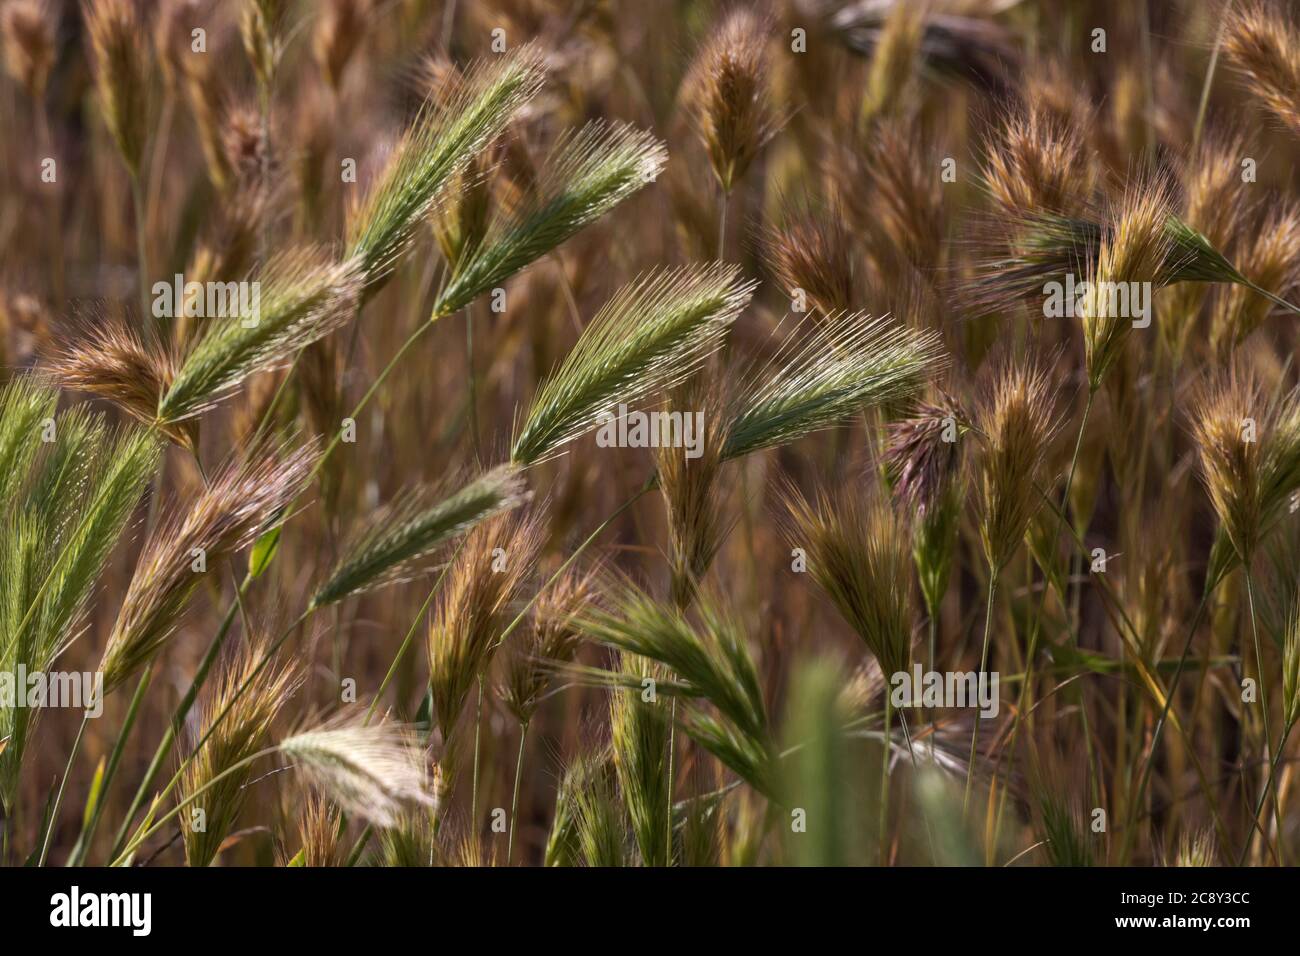 Close up textures of swaying brown and green roadside grasses Stock Photo